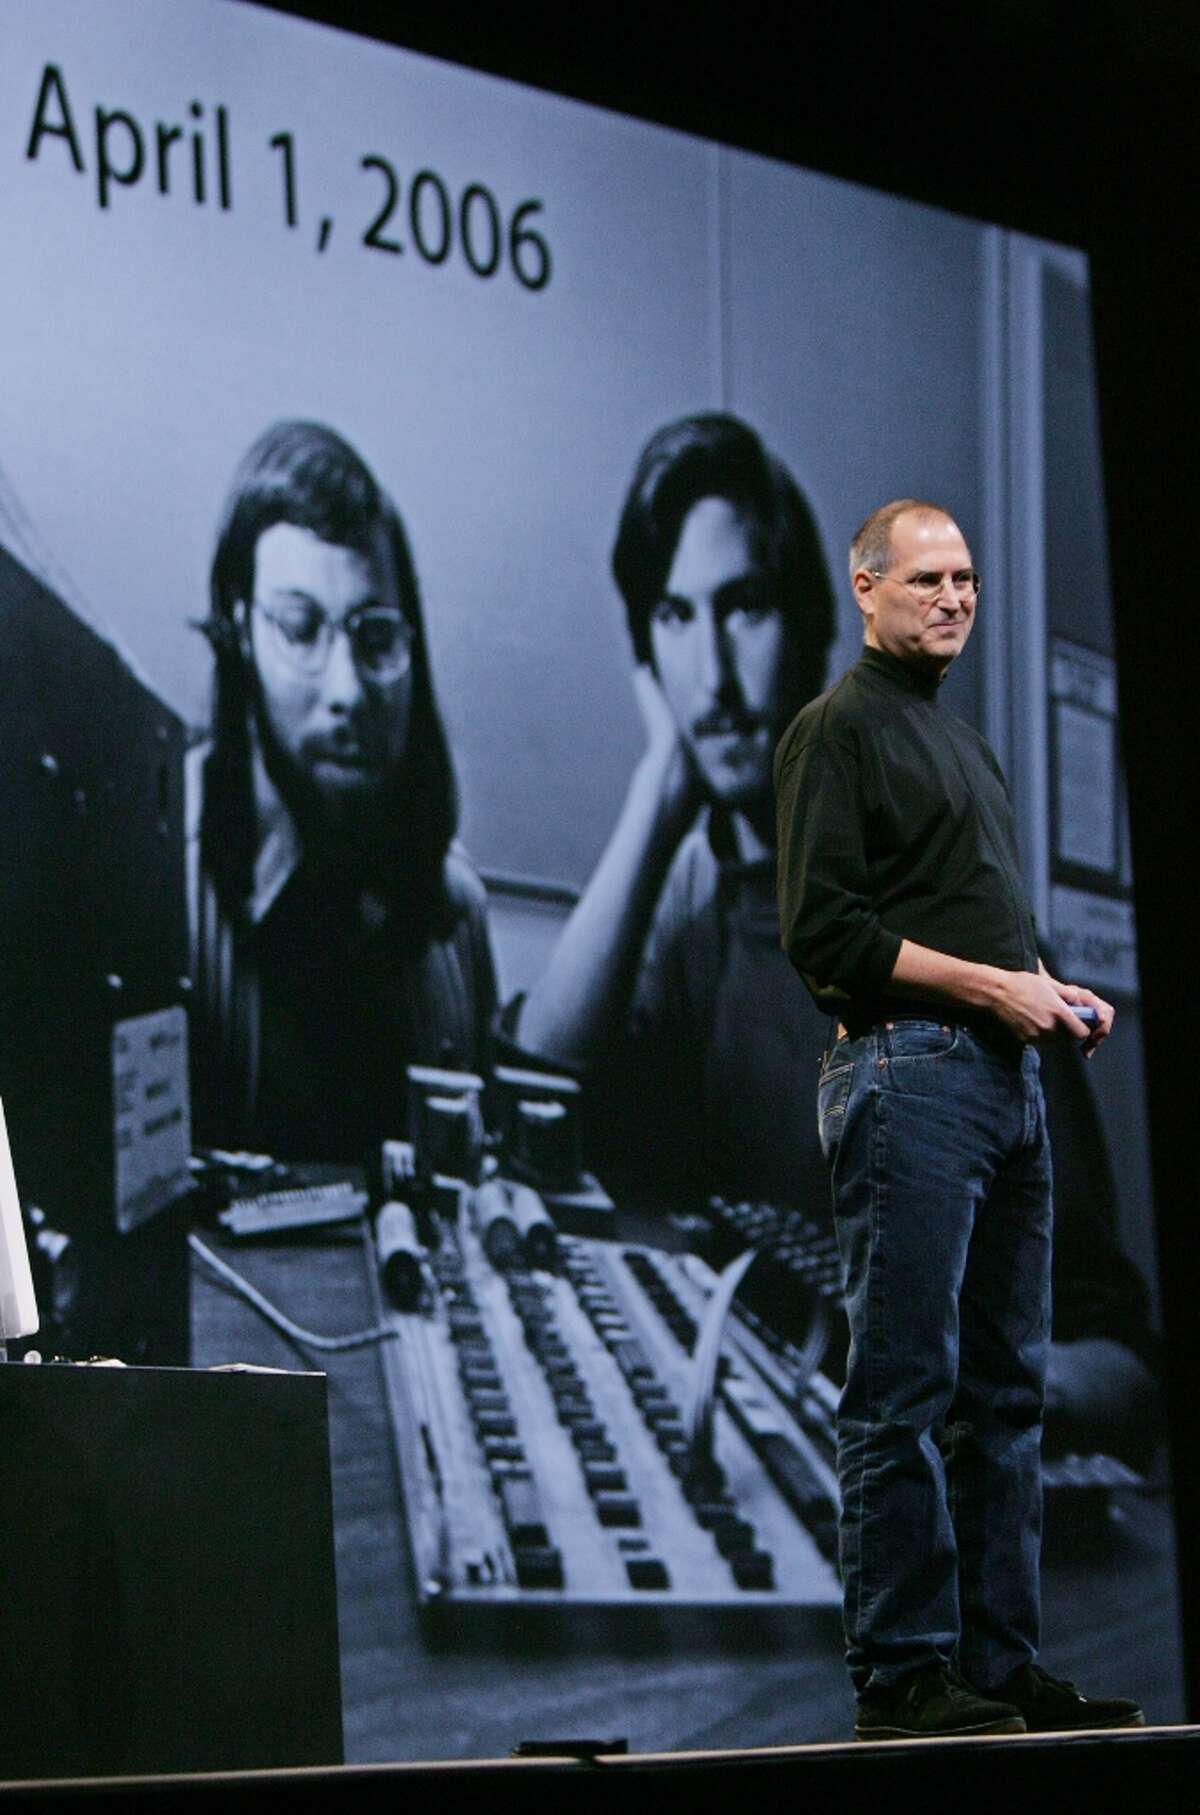 Click through this slideshow to see Steve Jobs and Steve Wozniak through the years. At Macworld 2006, Steve Jobs shows a photo of himself with Steve Wozniak as Apple prepares to celebrate its 30th anniversary.